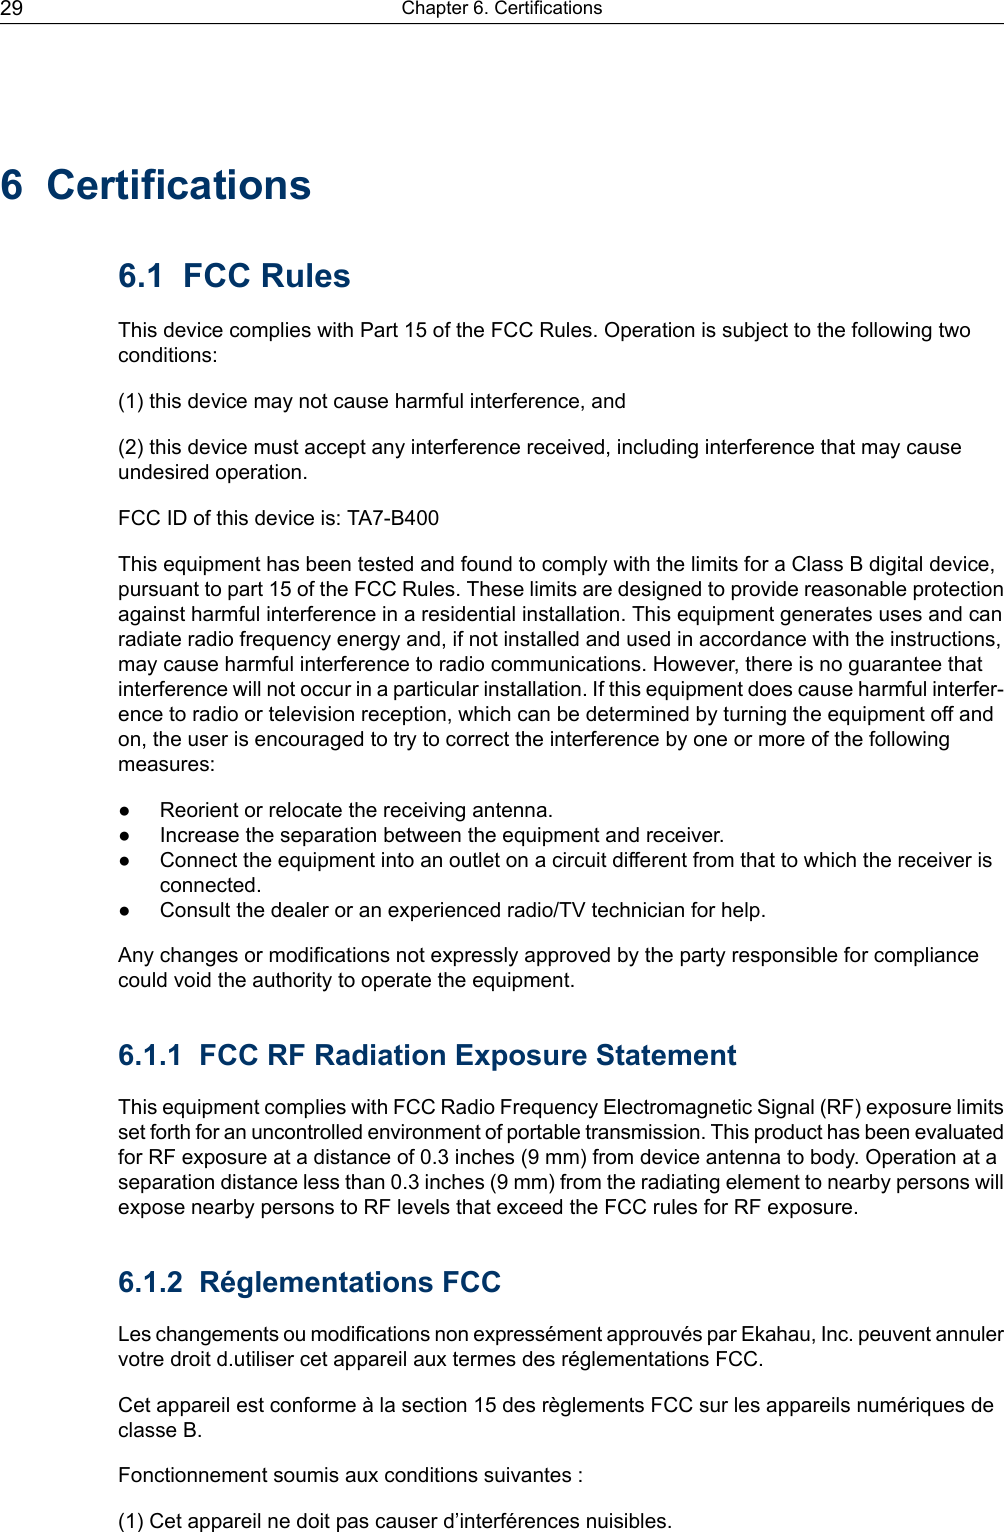 6 Certifications6.1 FCC RulesThis device complies with Part 15 of the FCC Rules. Operation is subject to the following twoconditions:(1) this device may not cause harmful interference, and(2) this device must accept any interference received, including interference that may causeundesired operation.FCC ID of this device is: TA7-B400This equipment has been tested and found to comply with the limits for a Class B digital device,pursuant to part 15 of the FCC Rules. These limits are designed to provide reasonable protectionagainst harmful interference in a residential installation. This equipment generates uses and canradiate radio frequency energy and, if not installed and used in accordance with the instructions,may cause harmful interference to radio communications. However, there is no guarantee thatinterference will not occur in a particular installation. If this equipment does cause harmful interfer-ence to radio or television reception, which can be determined by turning the equipment off andon, the user is encouraged to try to correct the interference by one or more of the followingmeasures:● Reorient or relocate the receiving antenna.● Increase the separation between the equipment and receiver.● Connect the equipment into an outlet on a circuit different from that to which the receiver isconnected.● Consult the dealer or an experienced radio/TV technician for help.Any changes or modifications not expressly approved by the party responsible for compliancecould void the authority to operate the equipment.6.1.1 FCC RF Radiation Exposure StatementThis equipment complies with FCC Radio Frequency Electromagnetic Signal (RF) exposure limitsset forth for an uncontrolled environment of portable transmission. This product has been evaluatedfor RF exposure at a distance of 0.3 inches (9 mm) from device antenna to body. Operation at aseparation distance less than 0.3 inches (9 mm) from the radiating element to nearby persons willexpose nearby persons to RF levels that exceed the FCC rules for RF exposure.6.1.2 Réglementations FCCLes changements ou modifications non expressément approuvés par Ekahau, Inc. peuvent annulervotre droit d.utiliser cet appareil aux termes des réglementations FCC.Cet appareil est conforme à la section 15 des règlements FCC sur les appareils numériques declasse B.Fonctionnement soumis aux conditions suivantes :(1) Cet appareil ne doit pas causer d’interférences nuisibles.Chapter 6. Certifications29